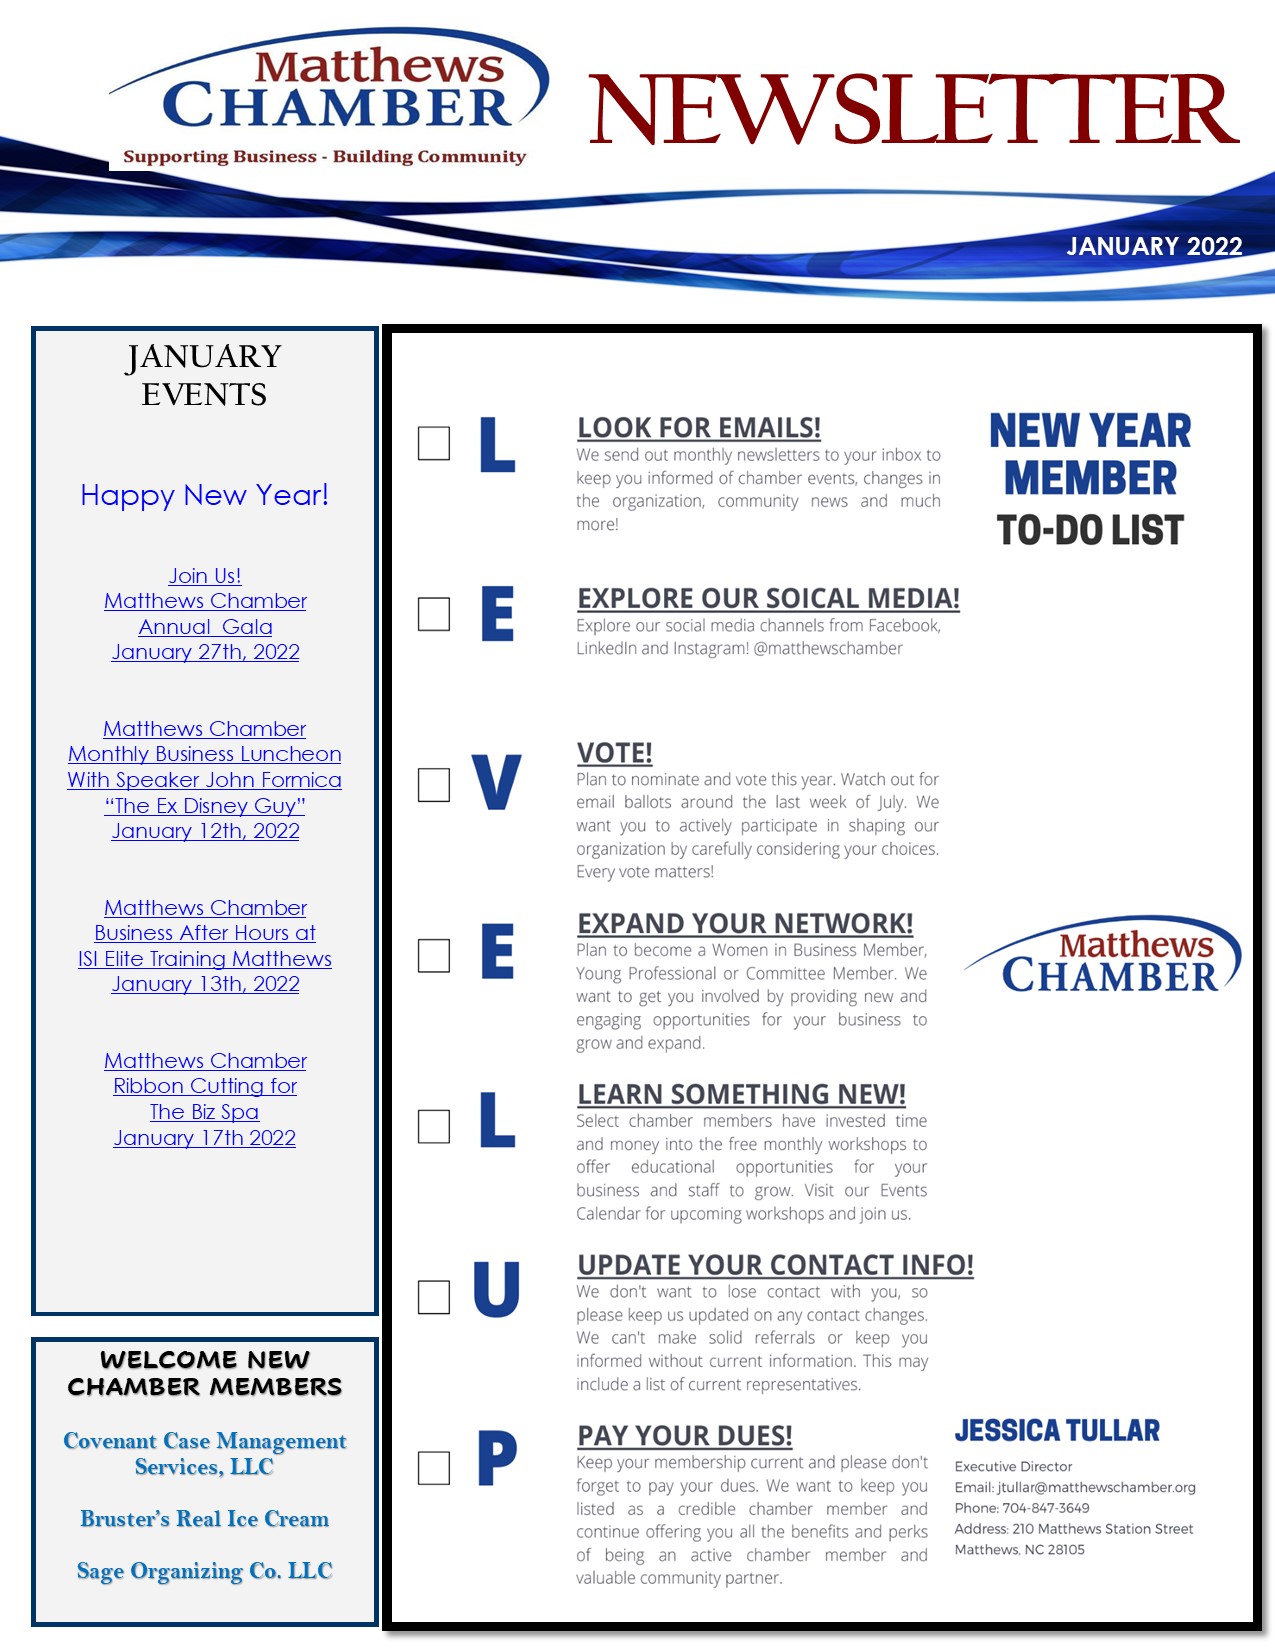 JANUARY 2022 NEWSLETTER – FRONT PAGE ONLY